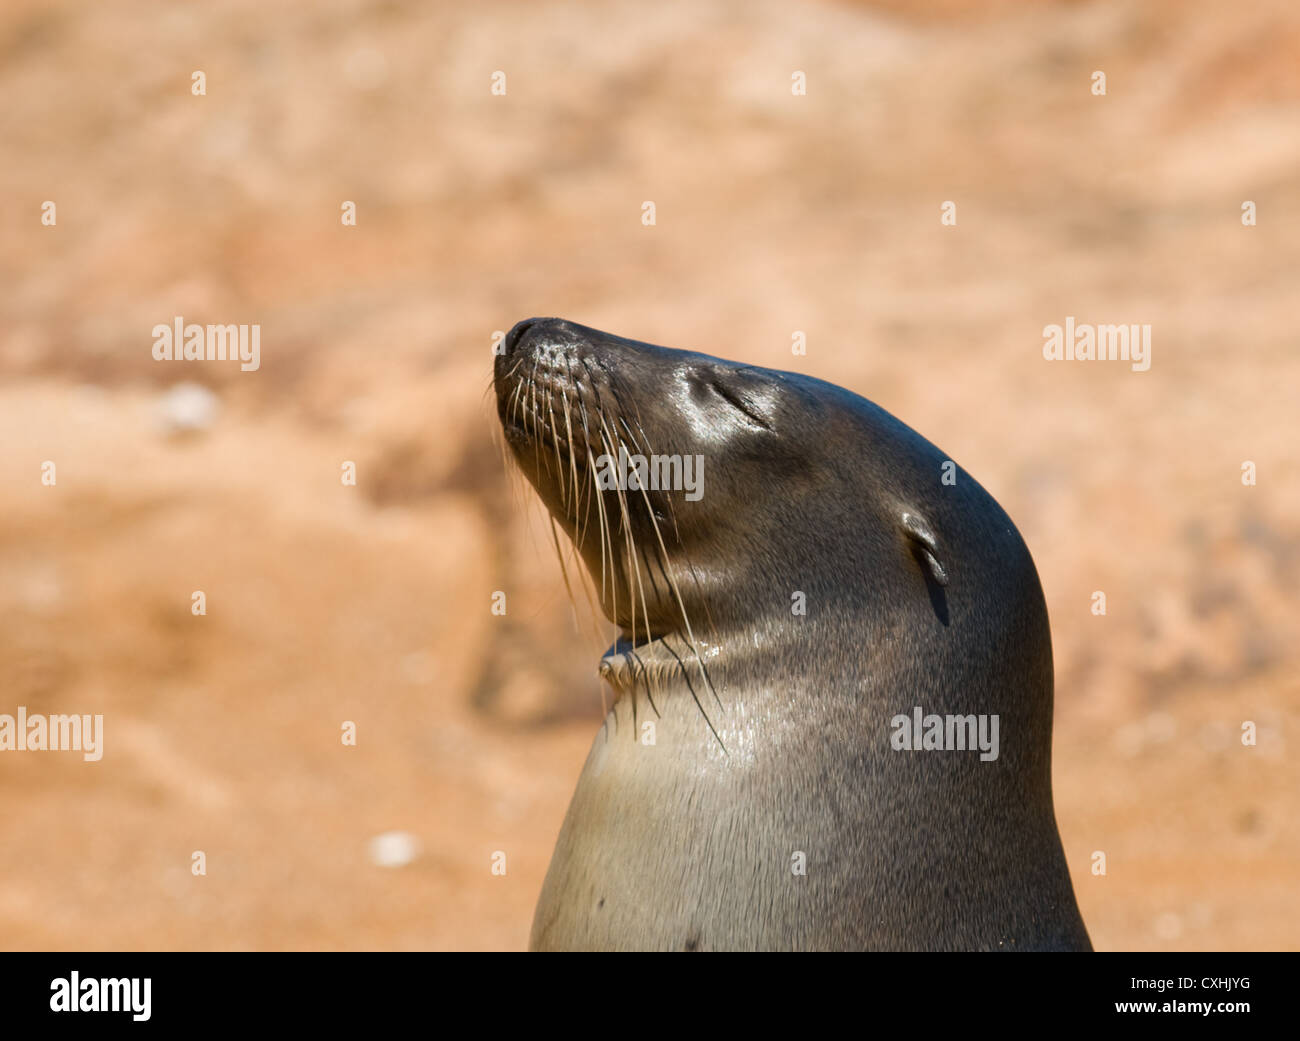 San diego sea lions hi-res stock photography and images - Alamy